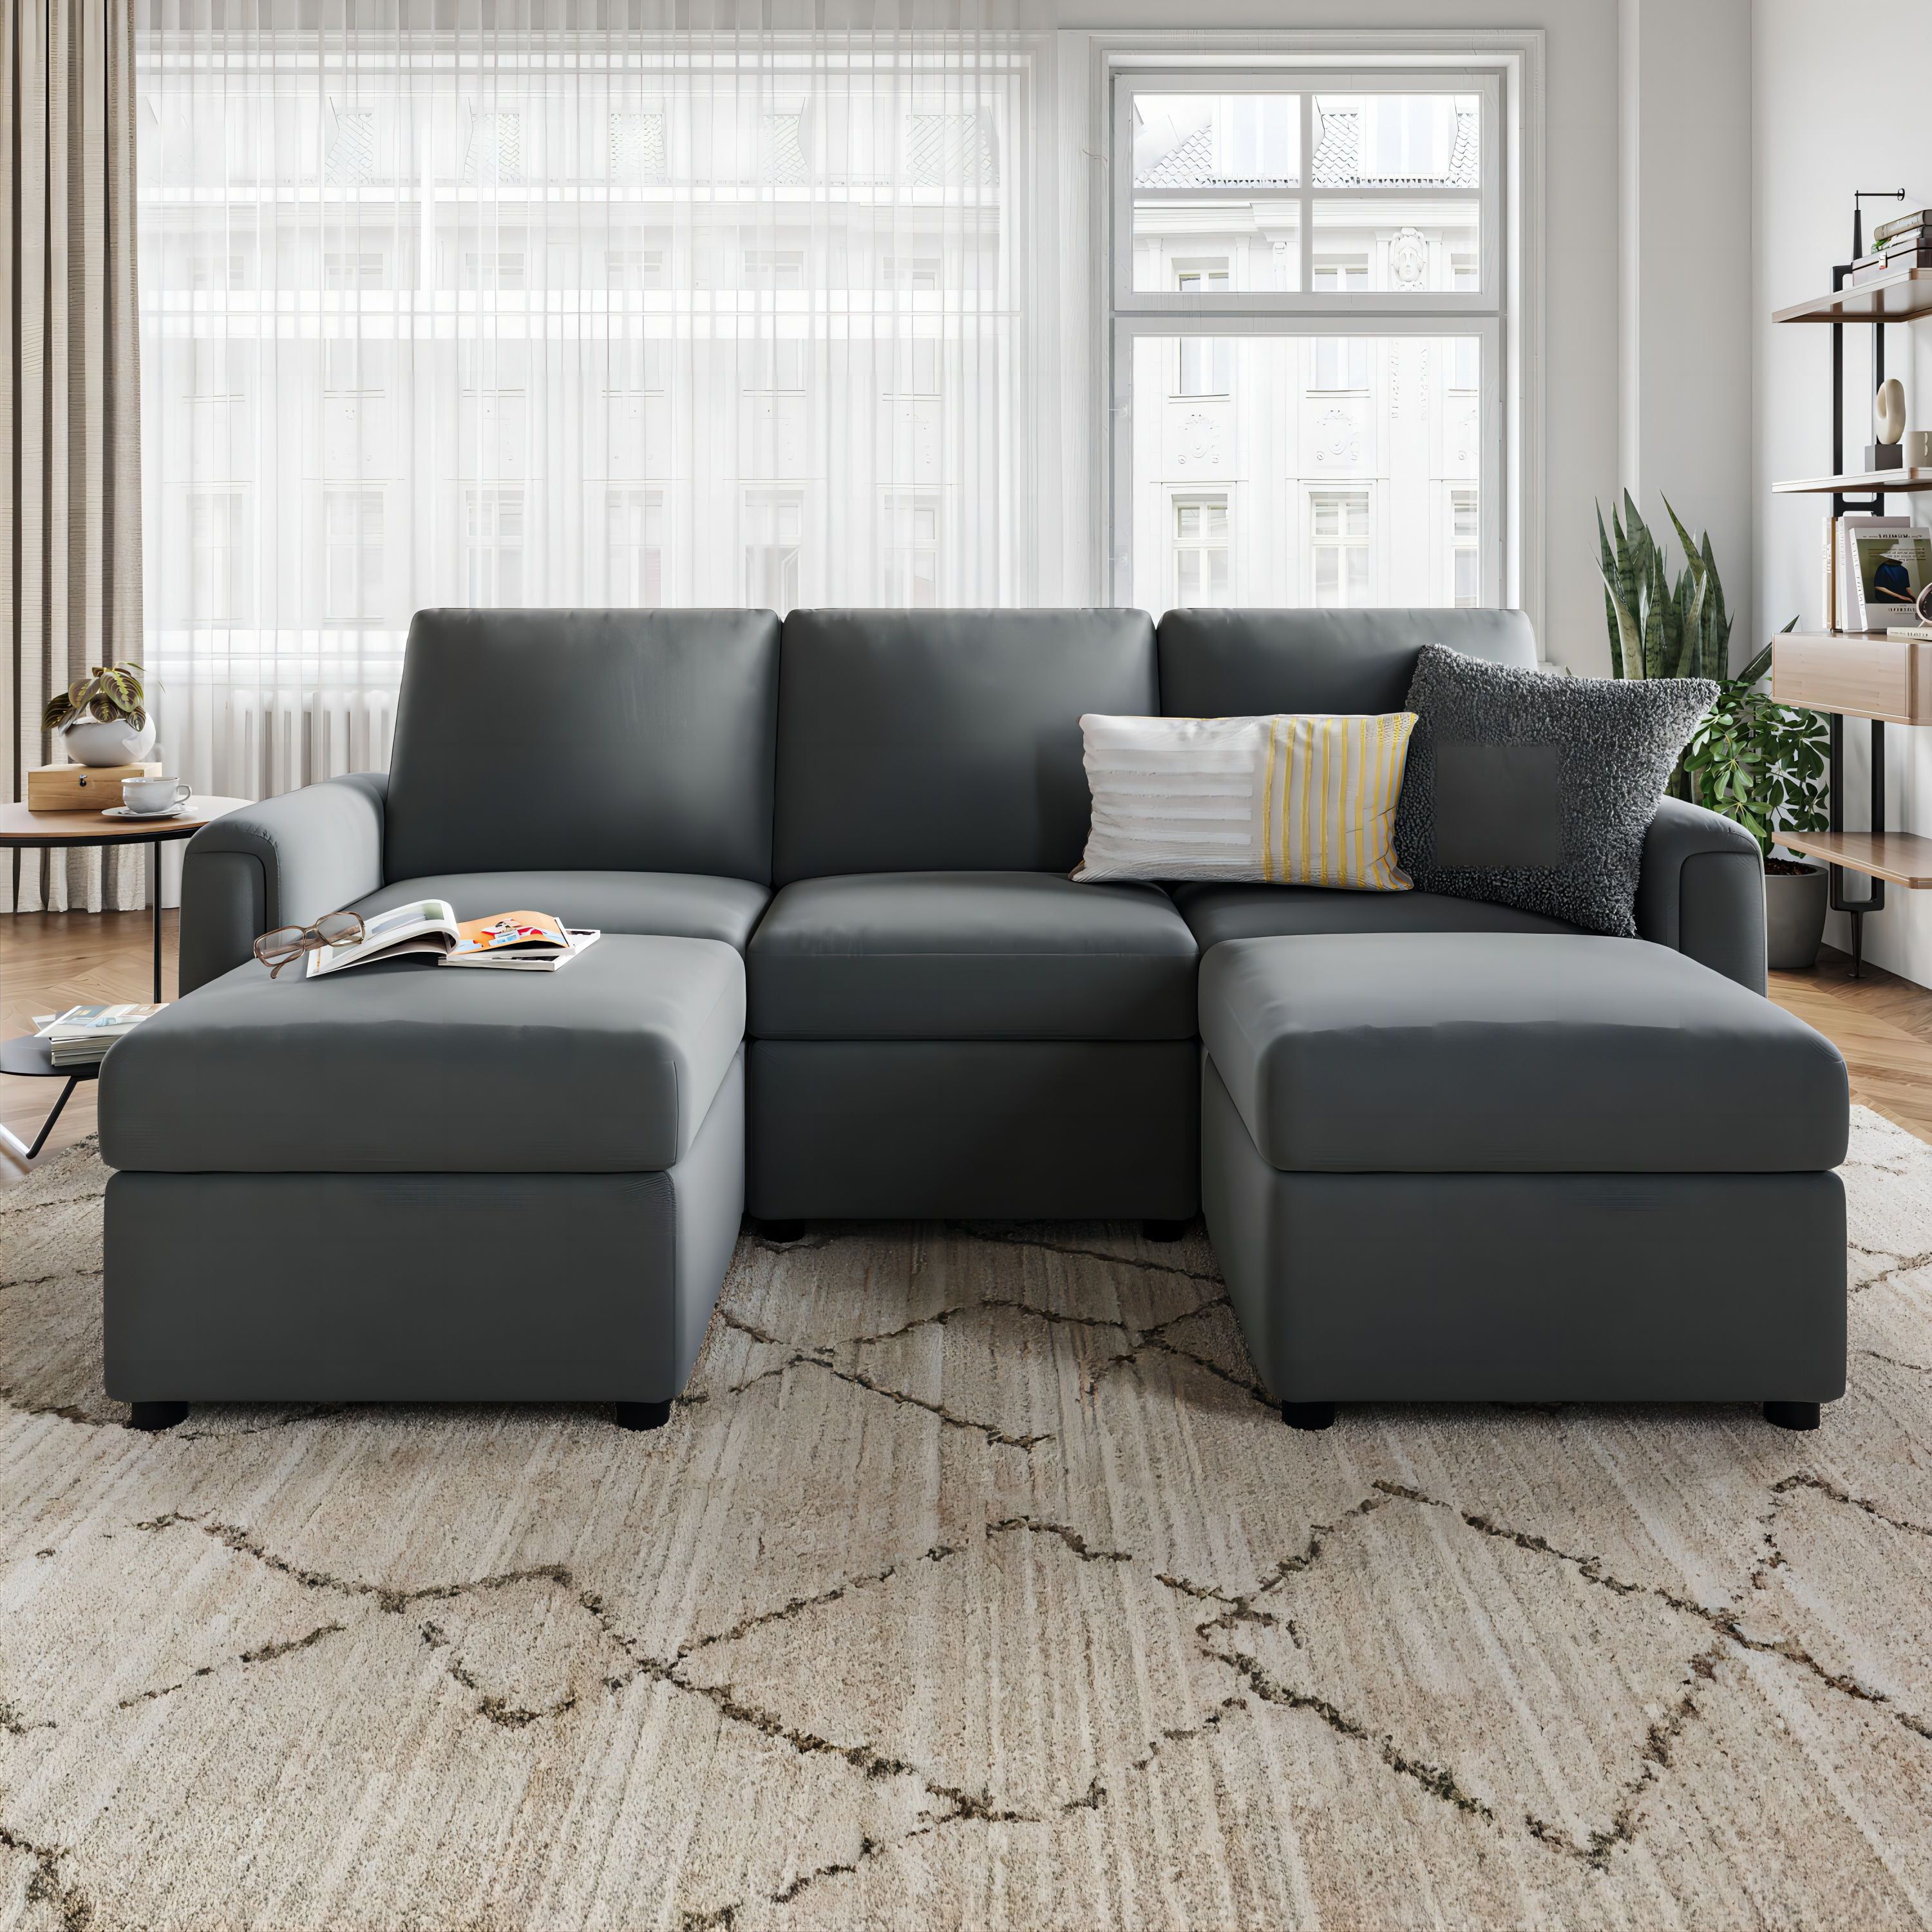 Linsy Home Modular Couches And Sofas Sectional With Storage Sectional Sofa  U Shaped Sectional Couch With Reversible Chaises, Dark Gray – Walmart Pertaining To Sectional Couches With Reversible Chaises (Gallery 9 of 20)